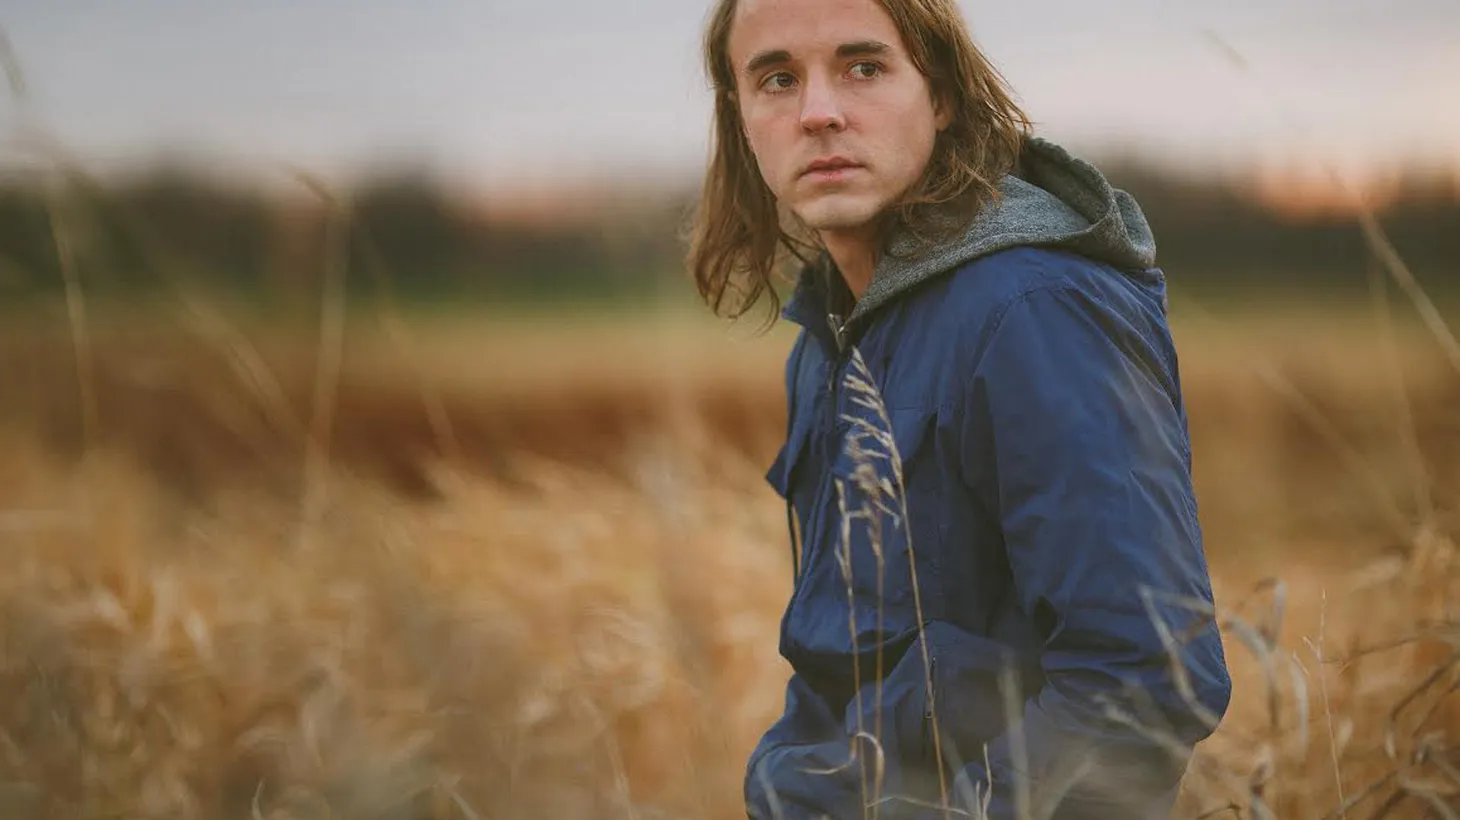 Charming Canadian singer/songwriter Andy Shauf made his album debut with a collection of seemingly lonely songs with optimistic touches that smartly color his tunes.